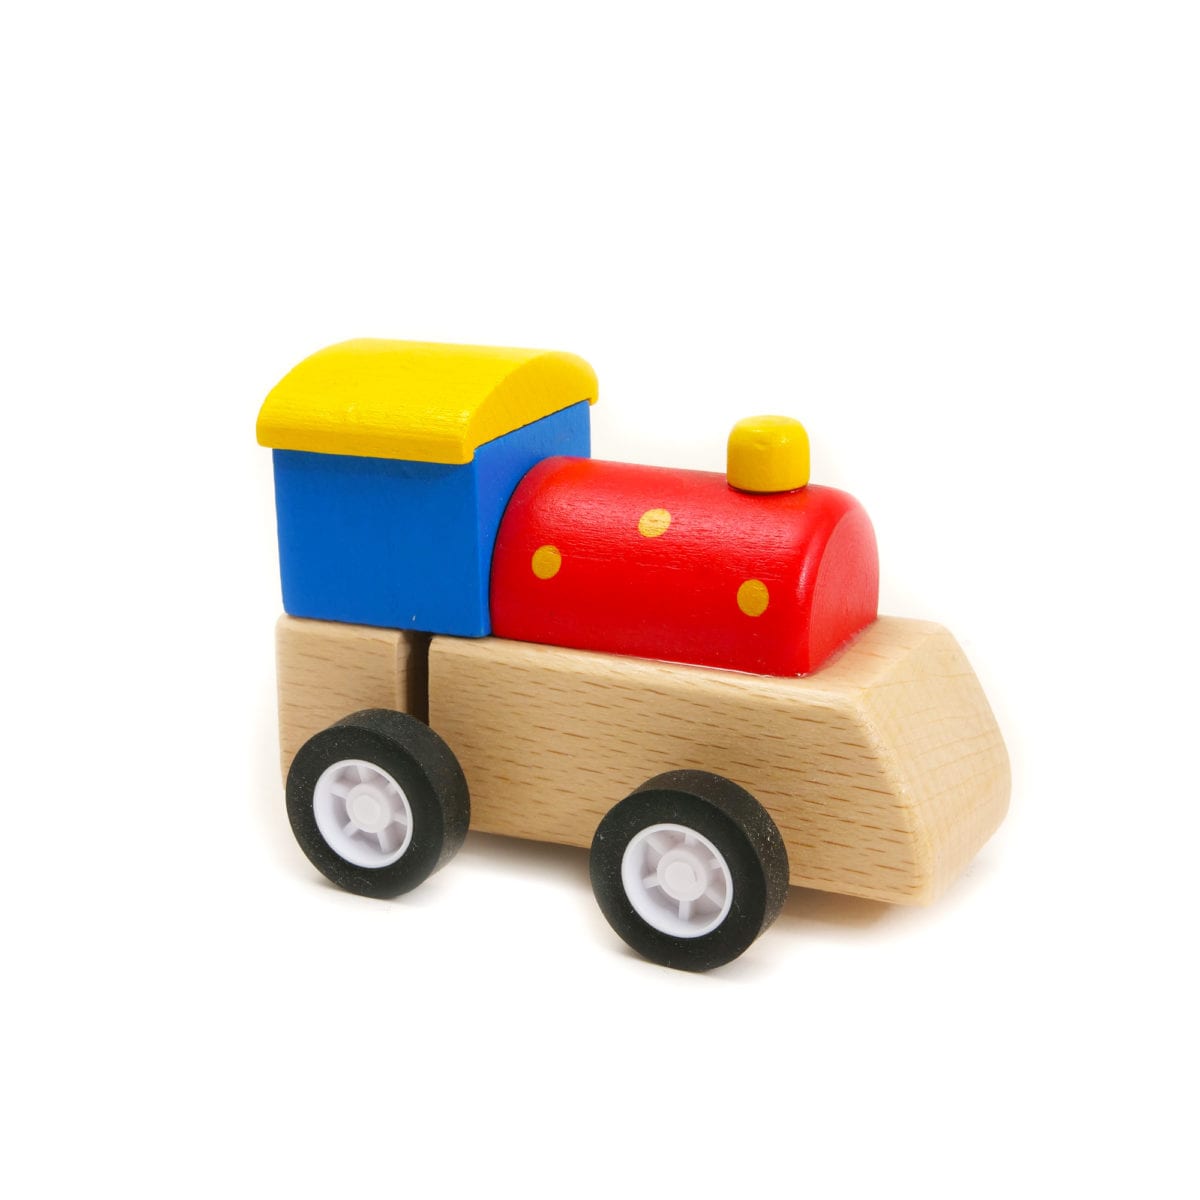 House of Marbles Wooden Clockwork Train